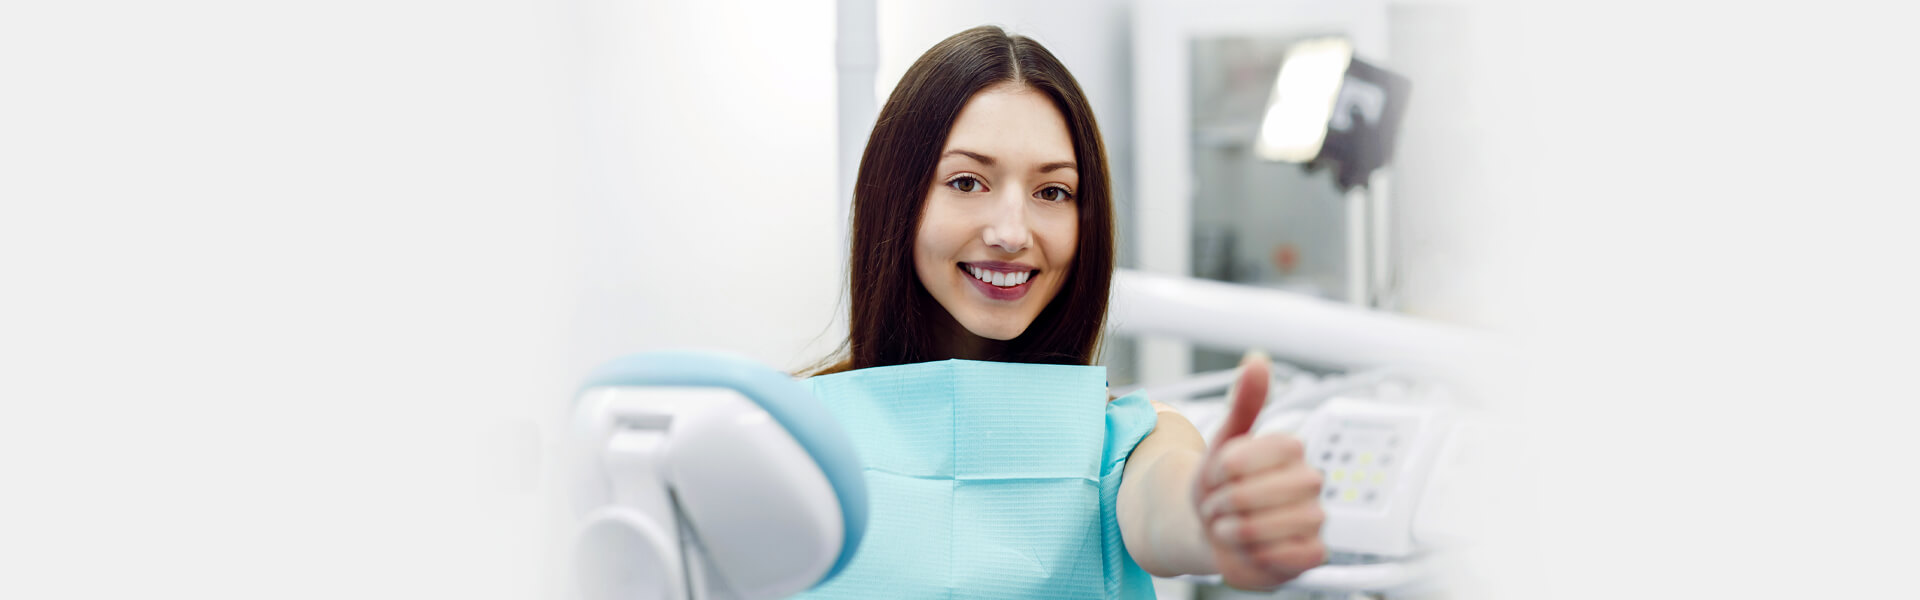 Are Cosmetic Injections Safe for Your Smile? | Tips to Consider